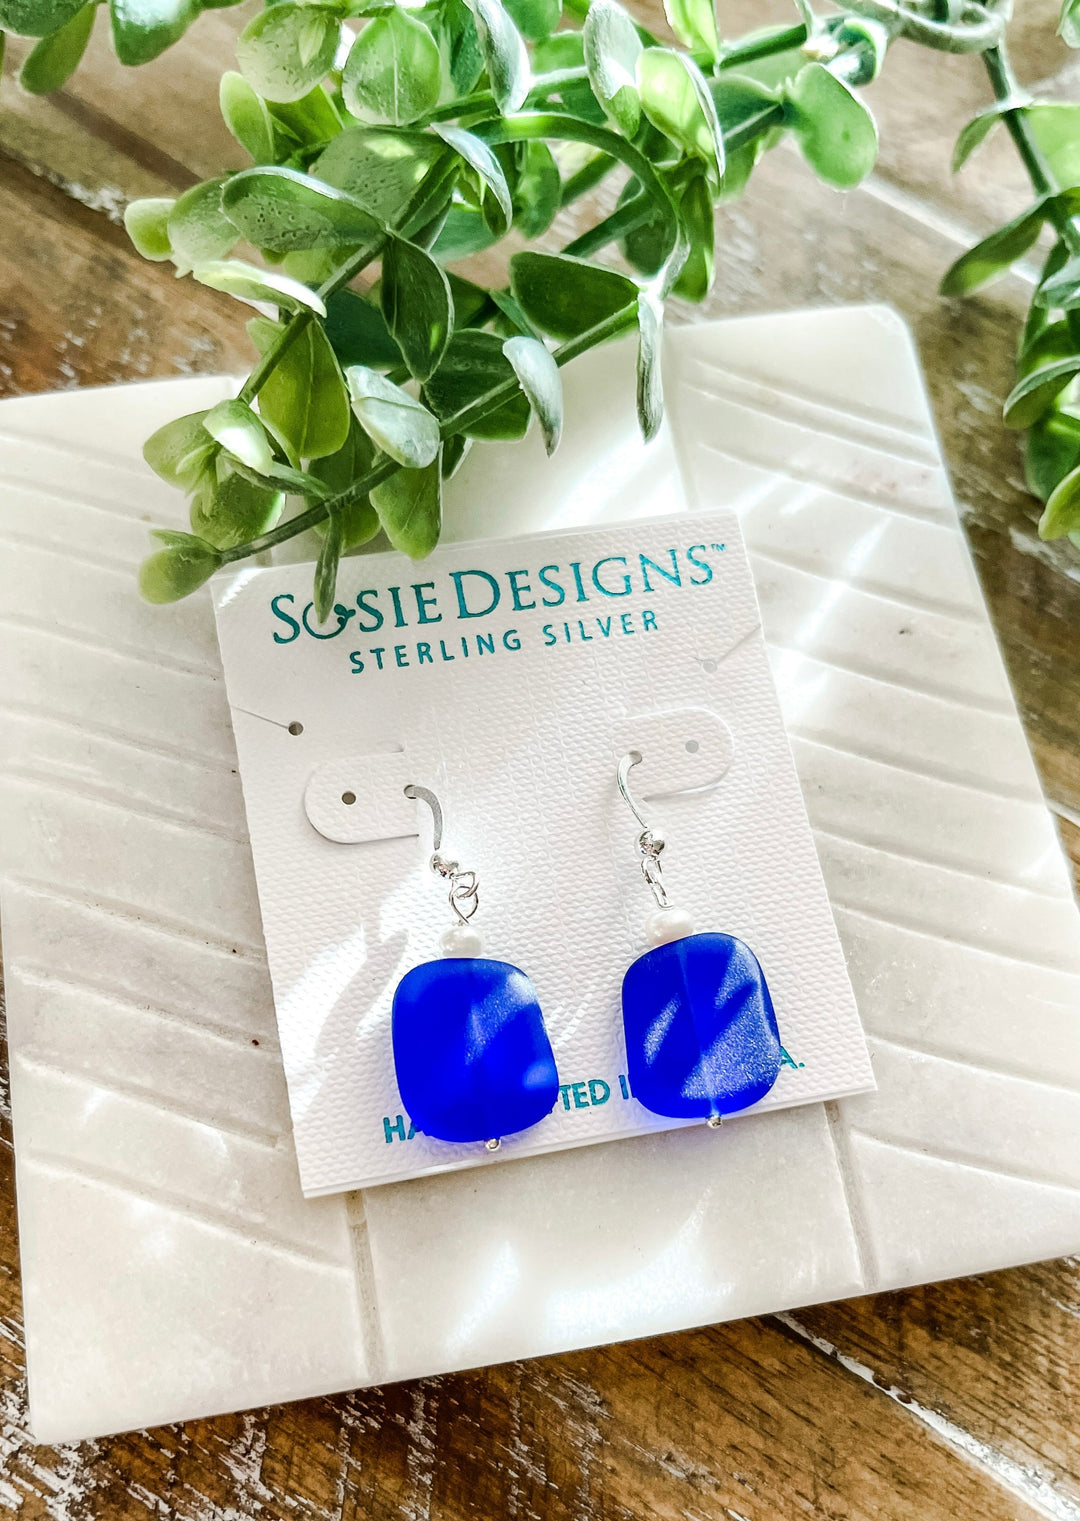 Cobalt Blue Eco Sea Pearl Earrings, made with sterling silver in the U.S.A. Small white pearl on top of the blue cobalt stone.